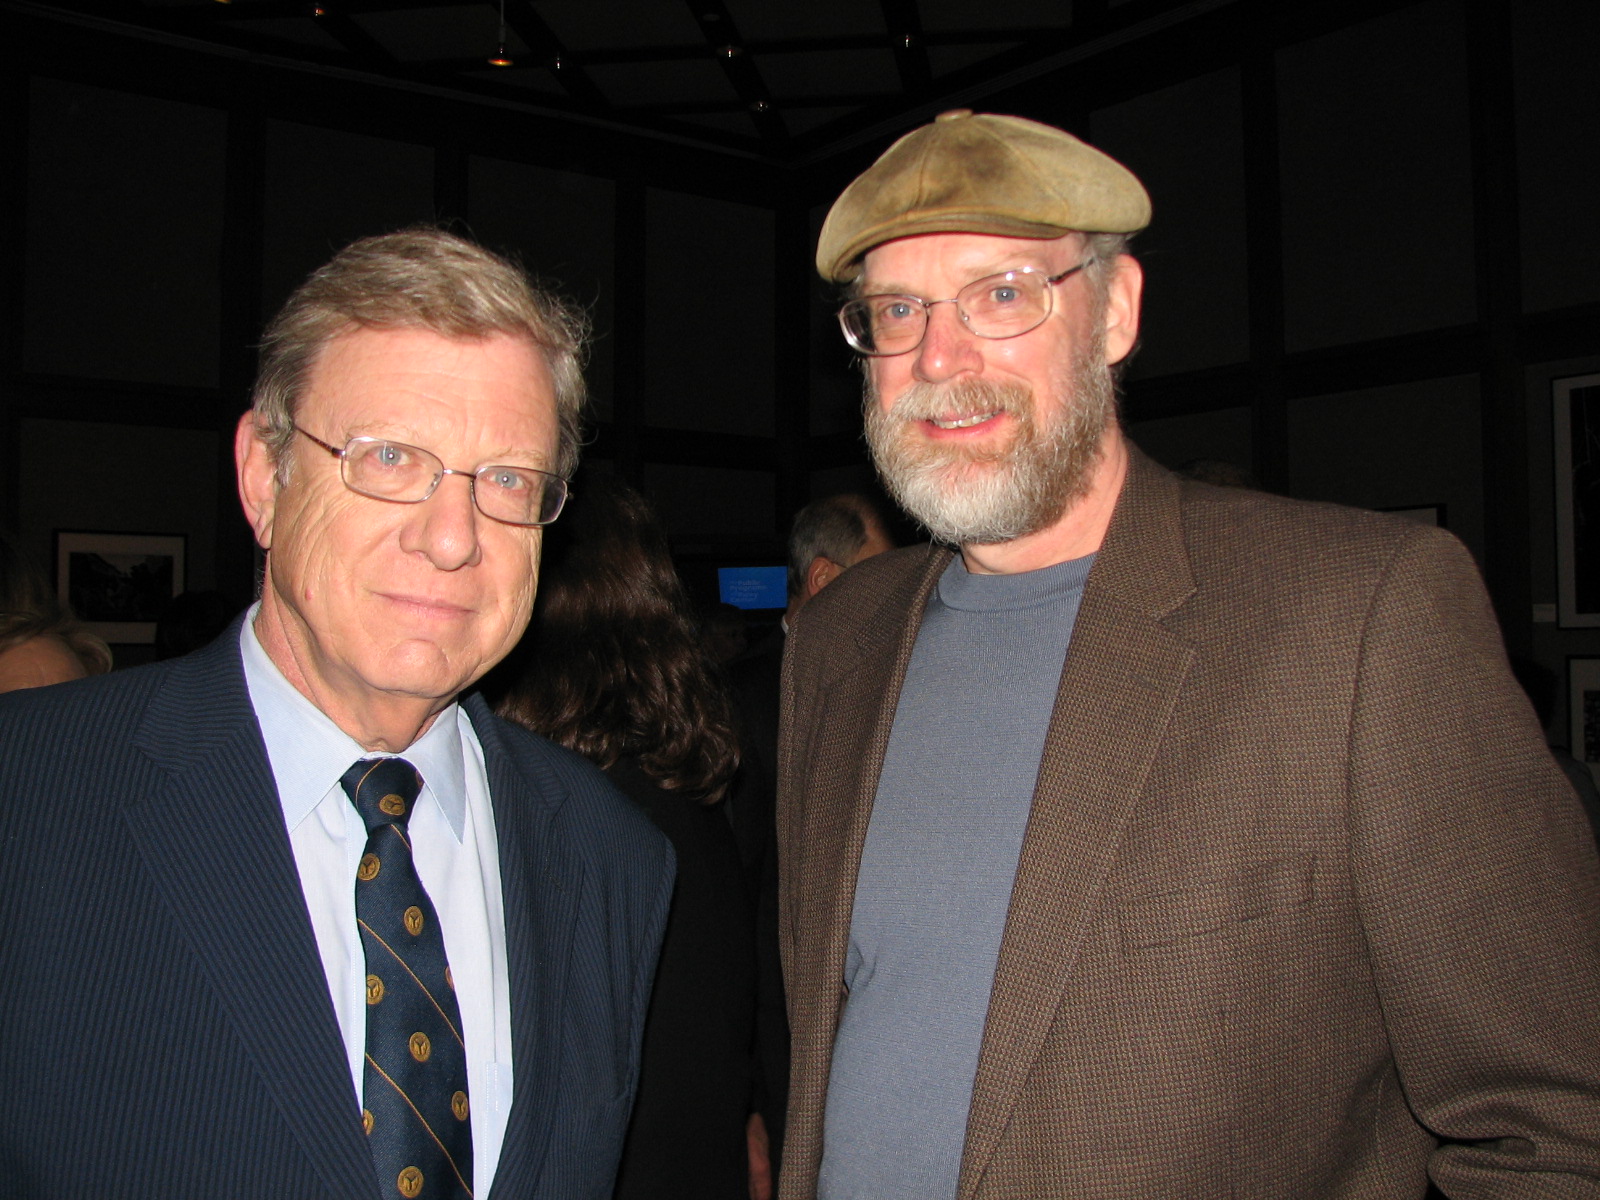 CBS Senior Political Correspondent Jeff Greenfield and Donald Boggs at the Paley Center for the Media premiere of A Ripple of Hope